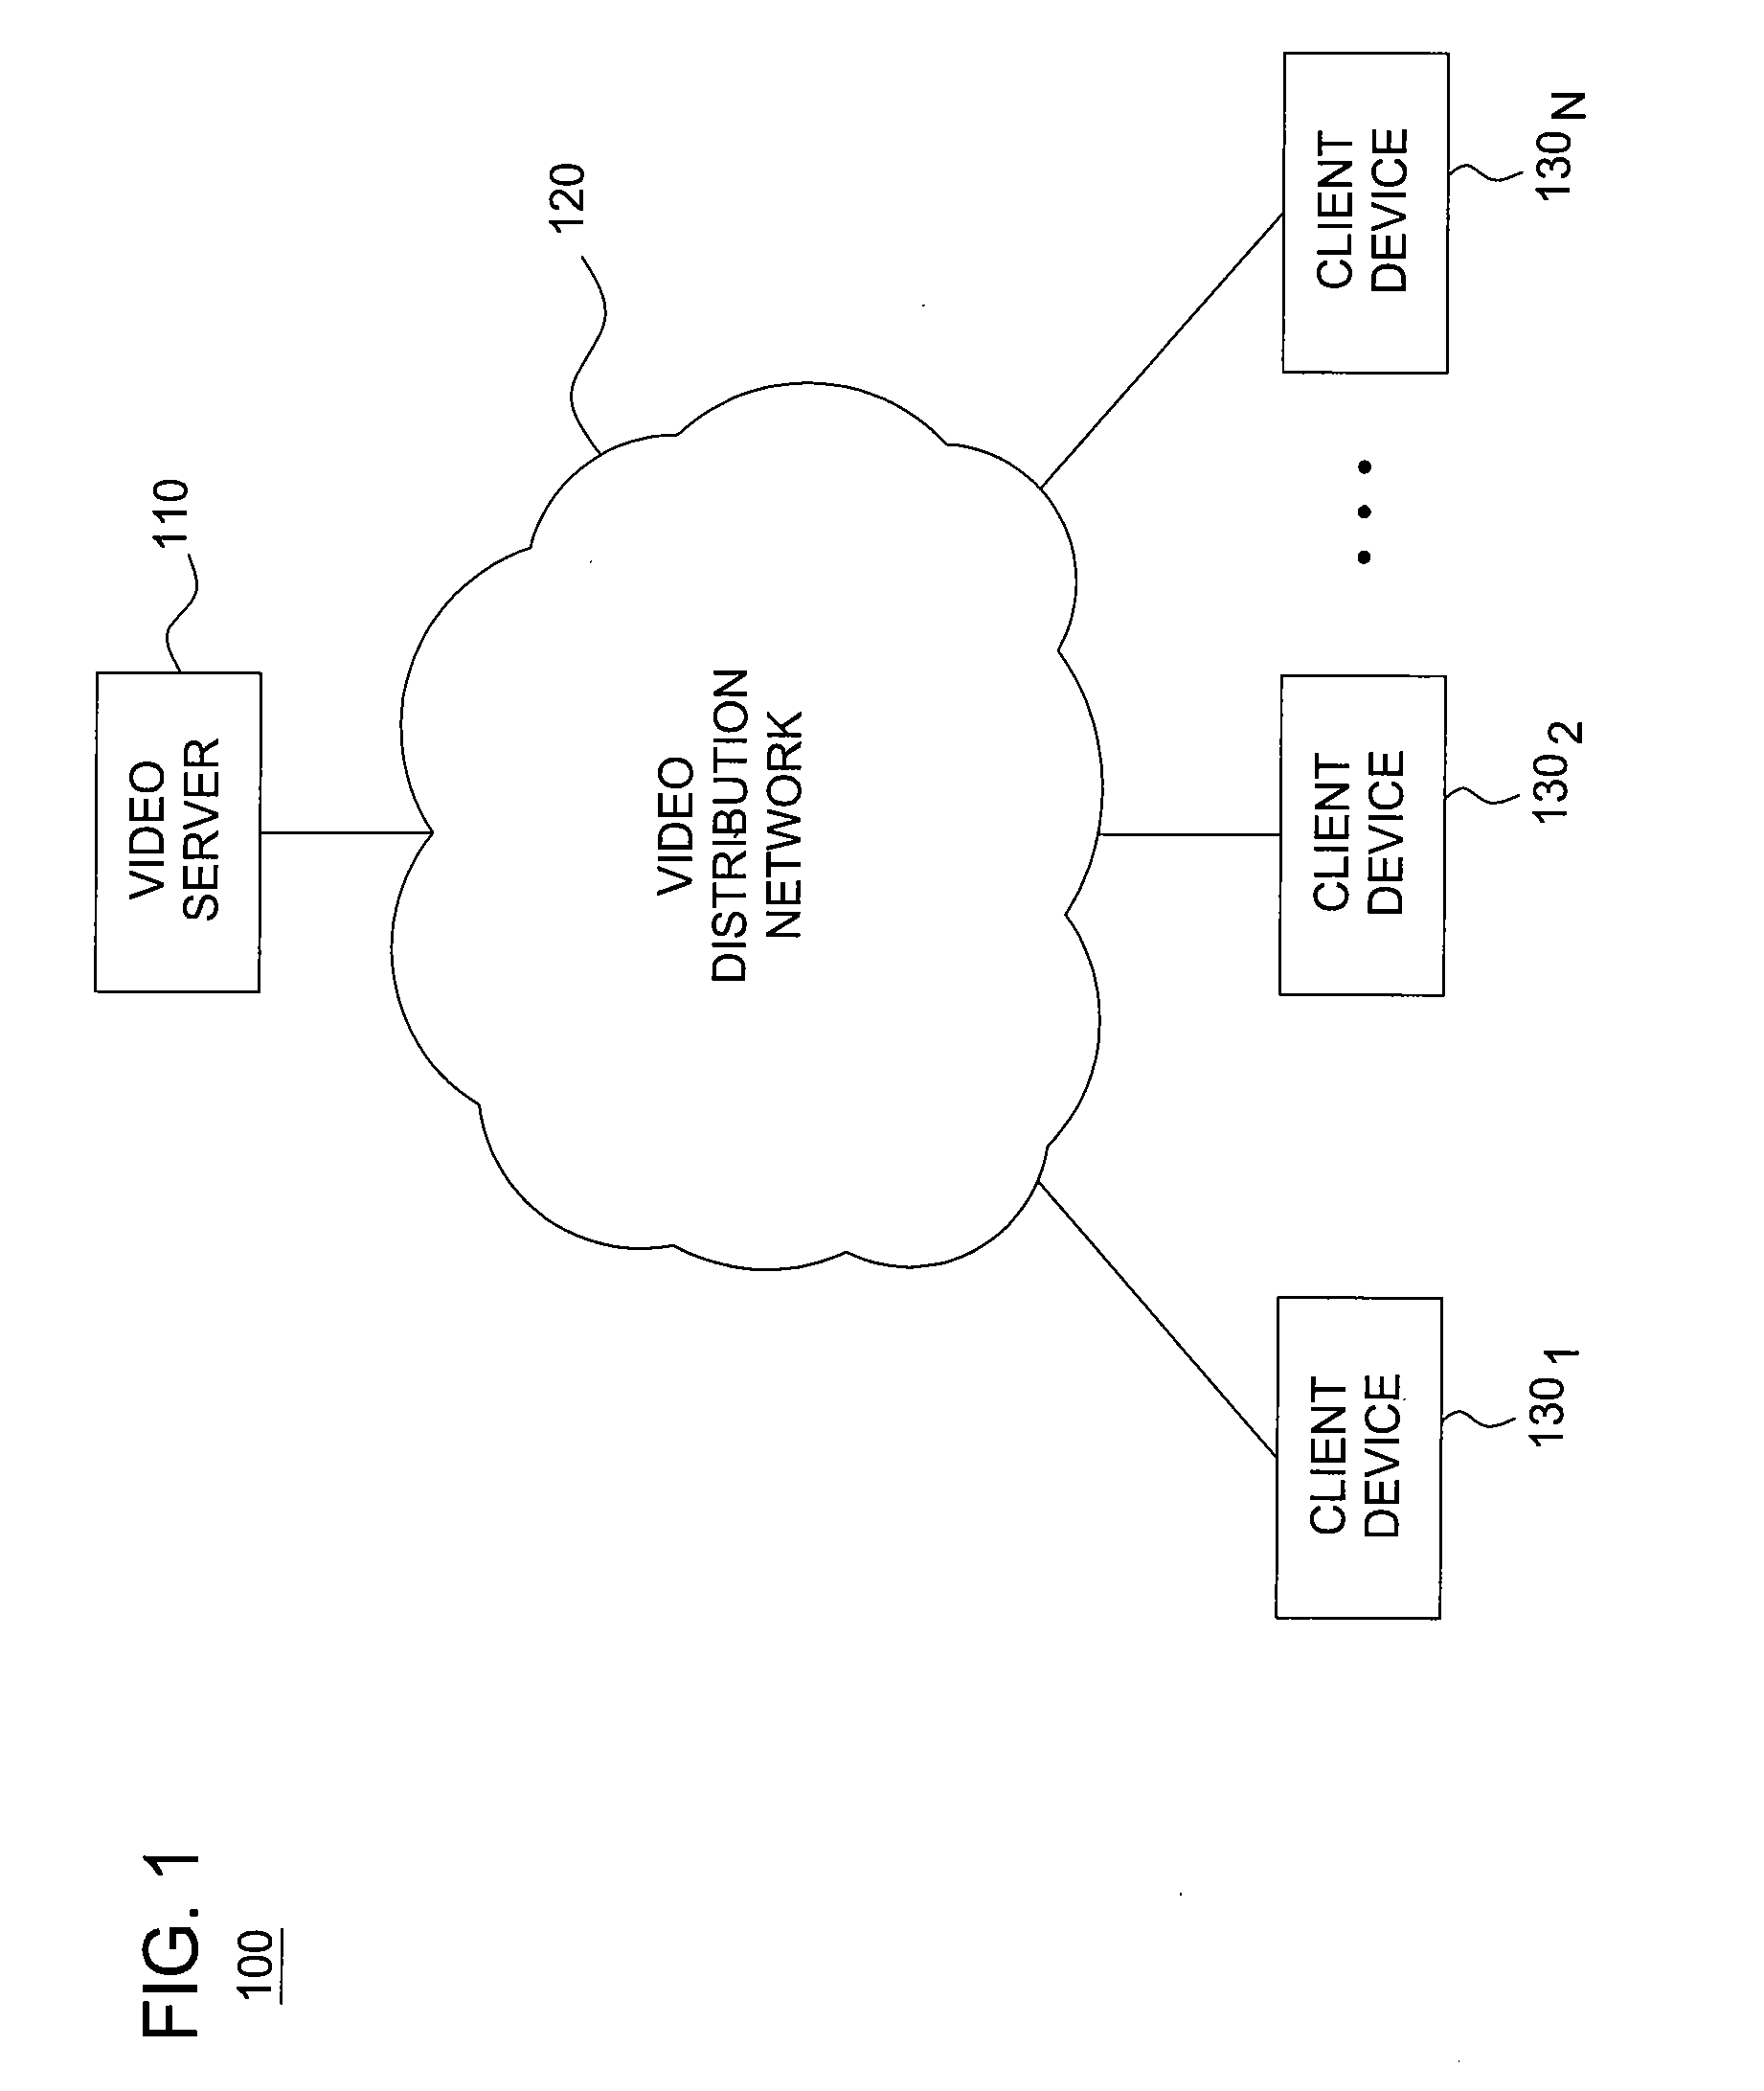 Method and apparatus for reducing delays due to channel changes